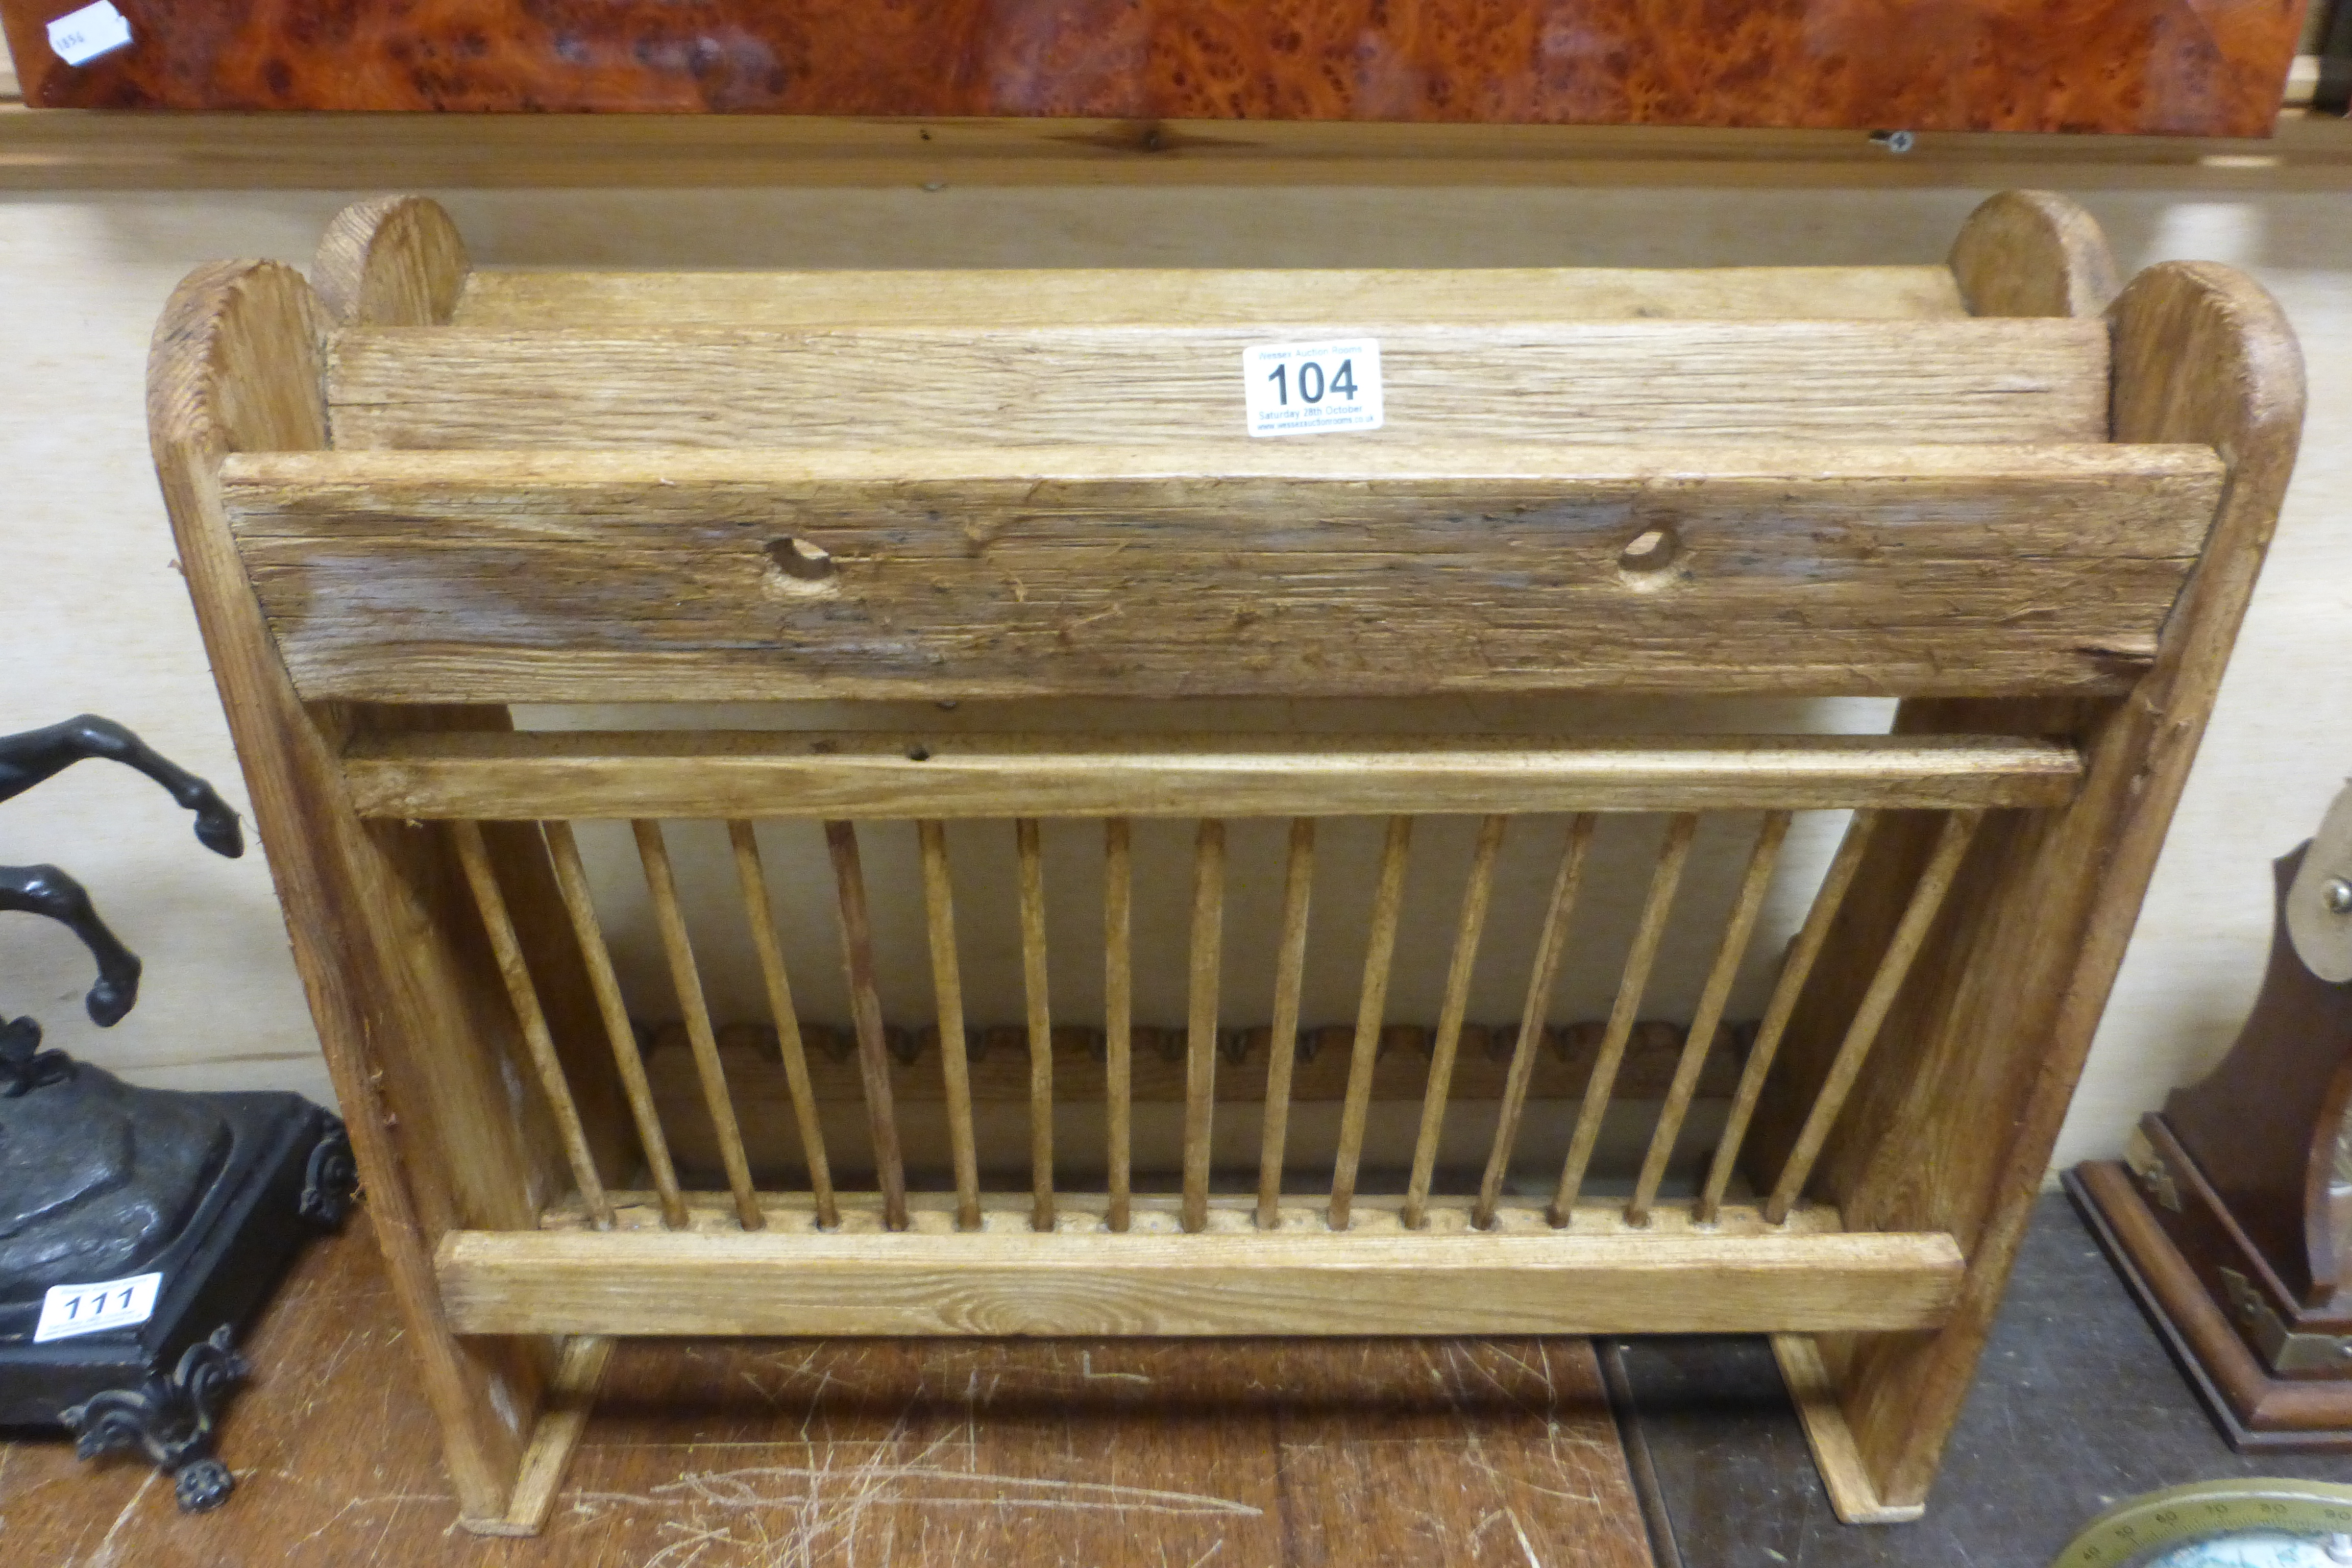 19th century Pine 18 section Plate Rack